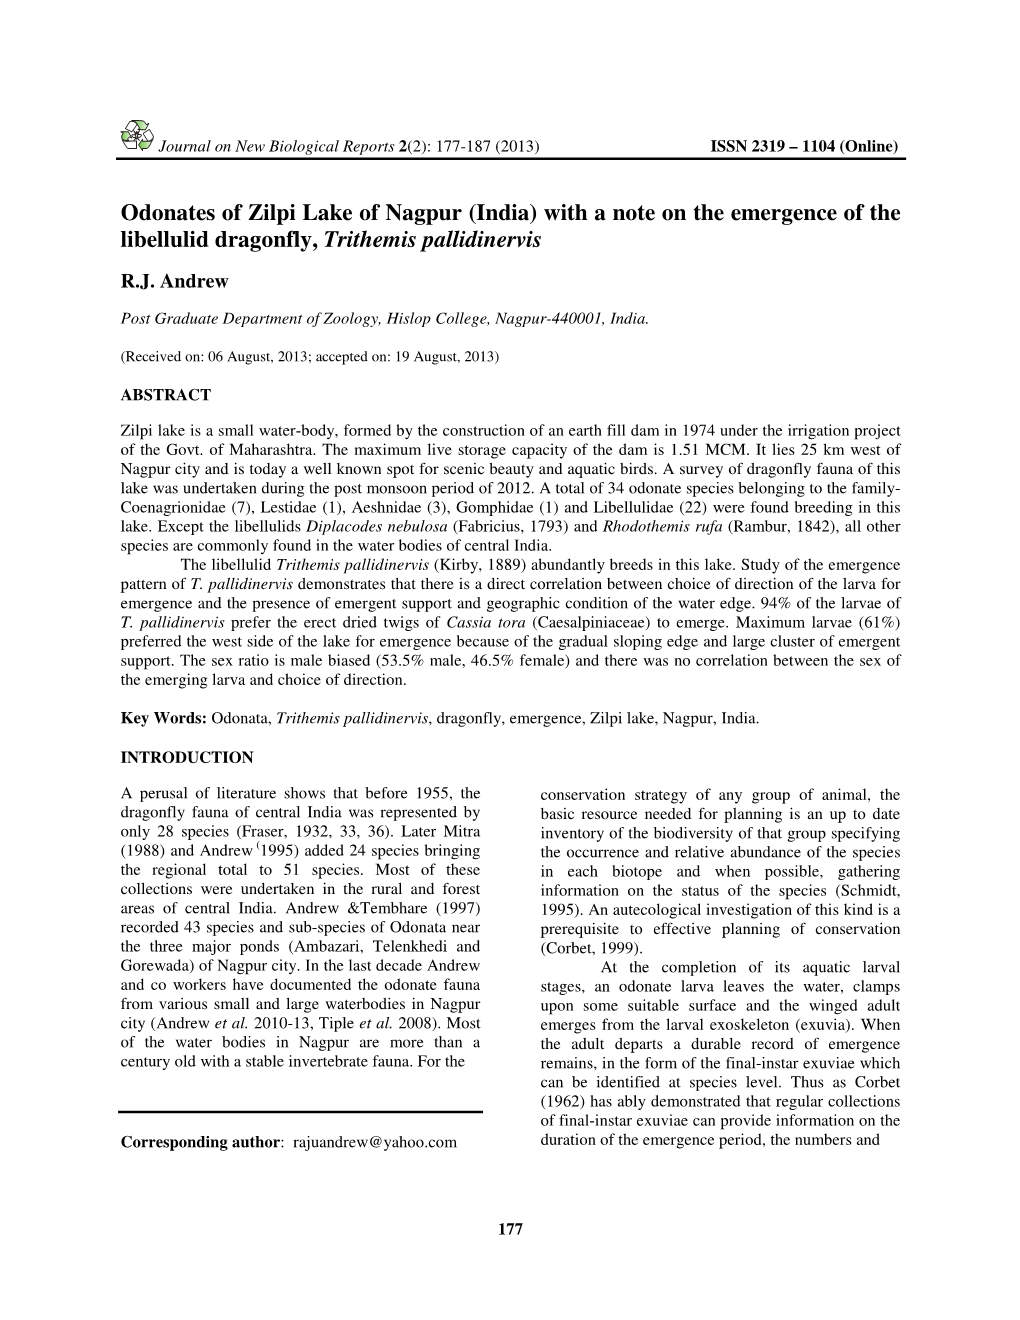 Odonates of Zilpi Lake of Nagpur (India) with a Note on the Emergence of the Libellulid Dragonfly, Trithemis Pallidinervis R.J